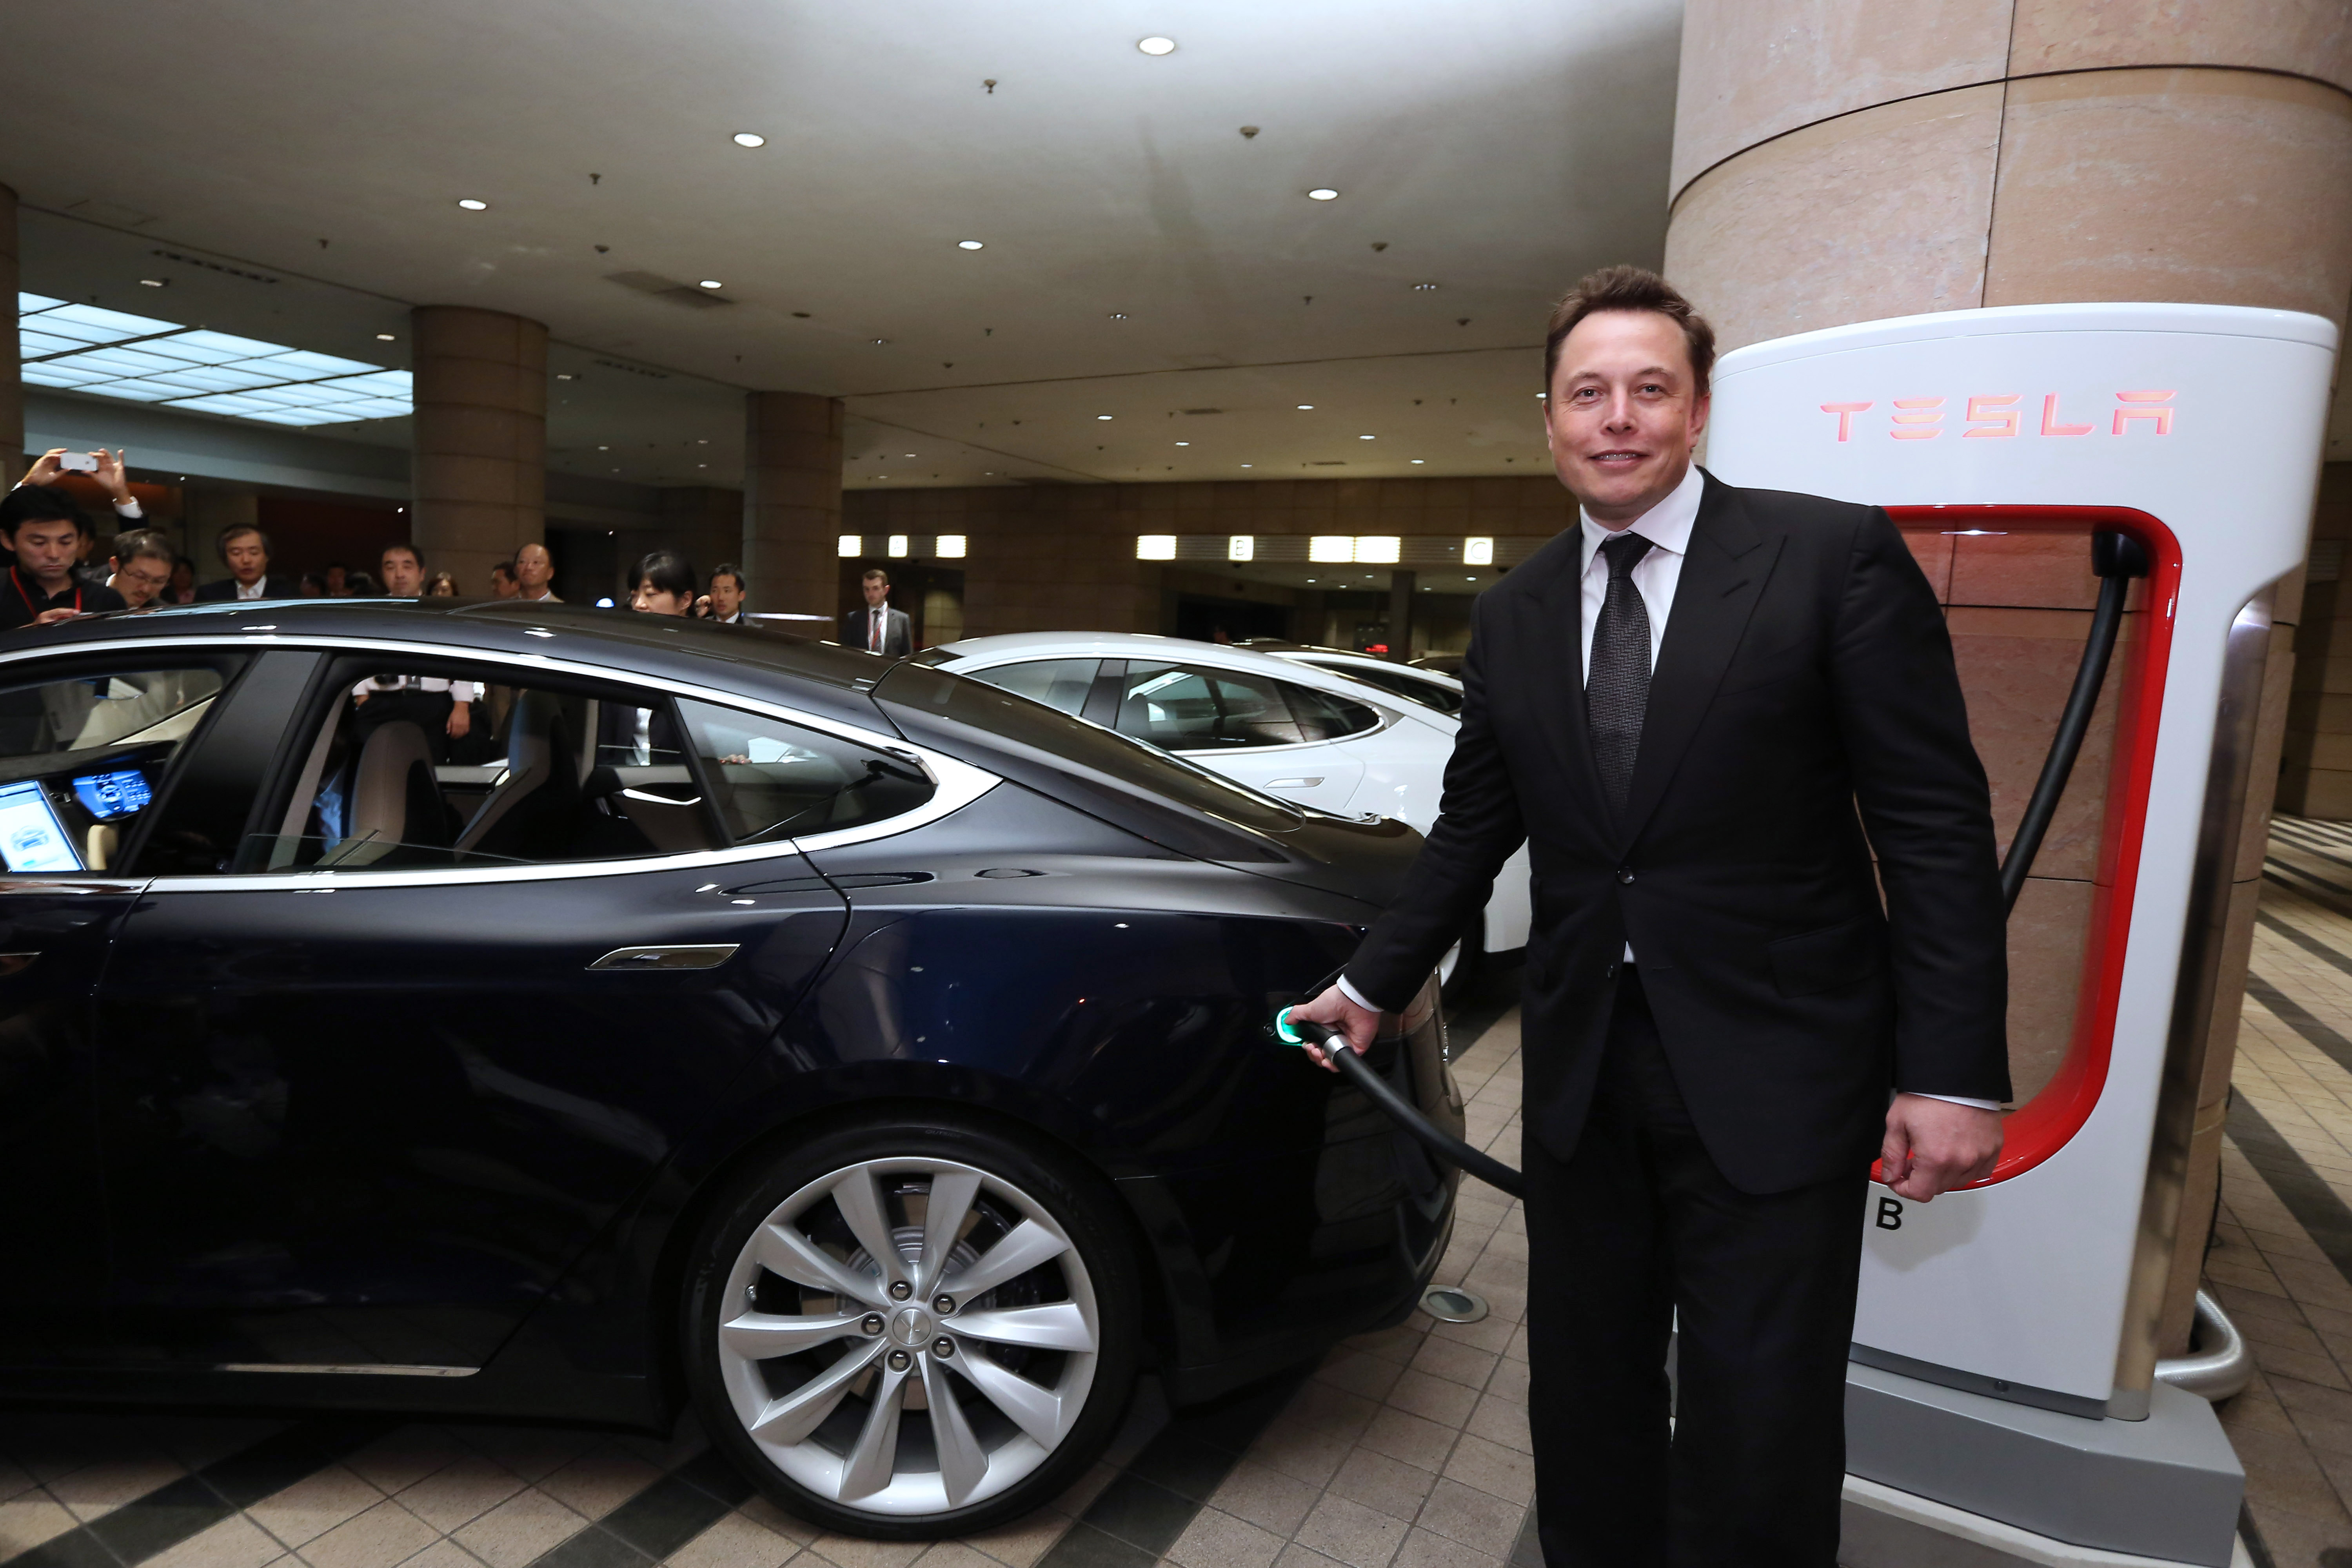 Elon Musk, co-founder and chief executive officer of Tesla Motors Inc., demonstrates how to charge the company's Model S electric sedan following a news conference in Tokyo on Monday. | BLOOMBERG